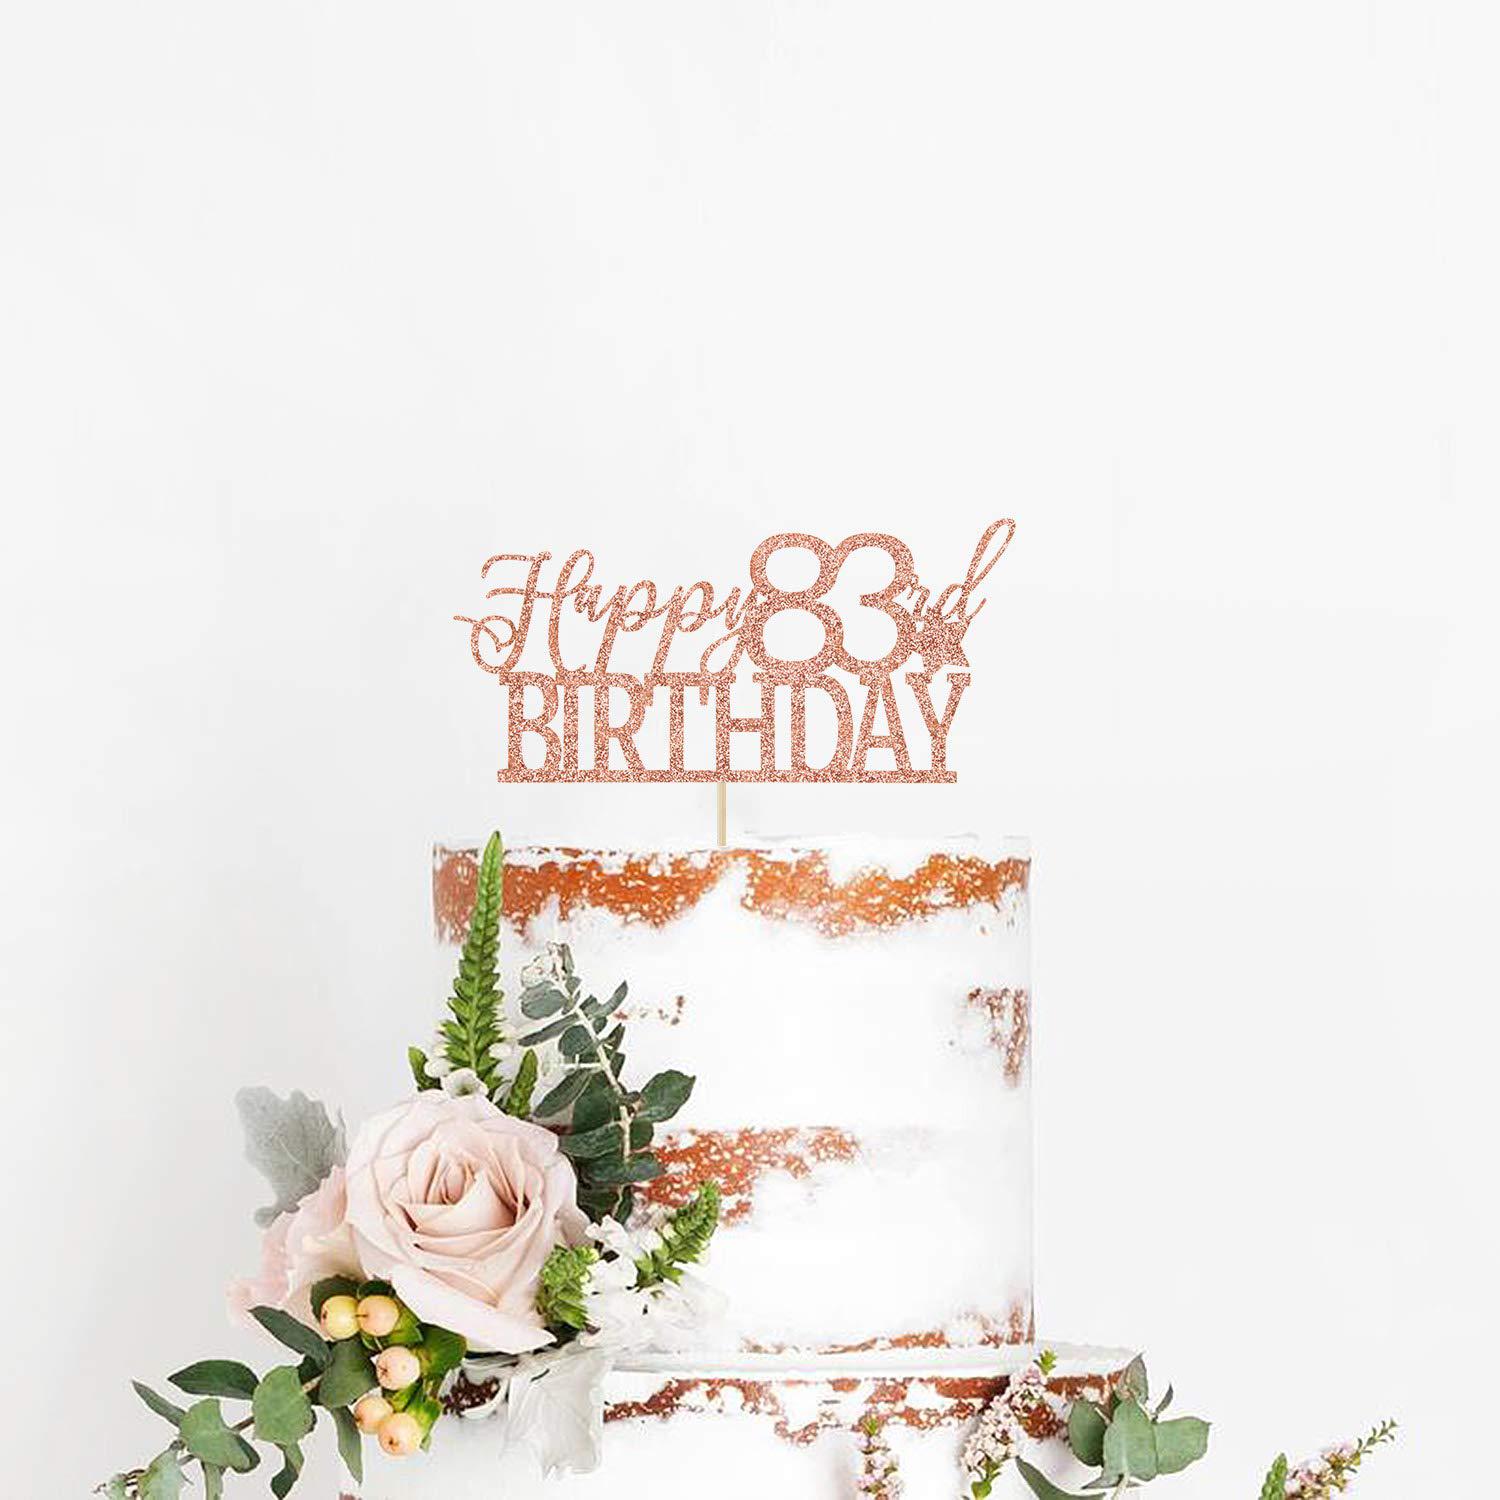 YotaWish rose gold glitter happy 83rd birthday cake topper - hello 83 - cheers to 83 years party decoration supplies